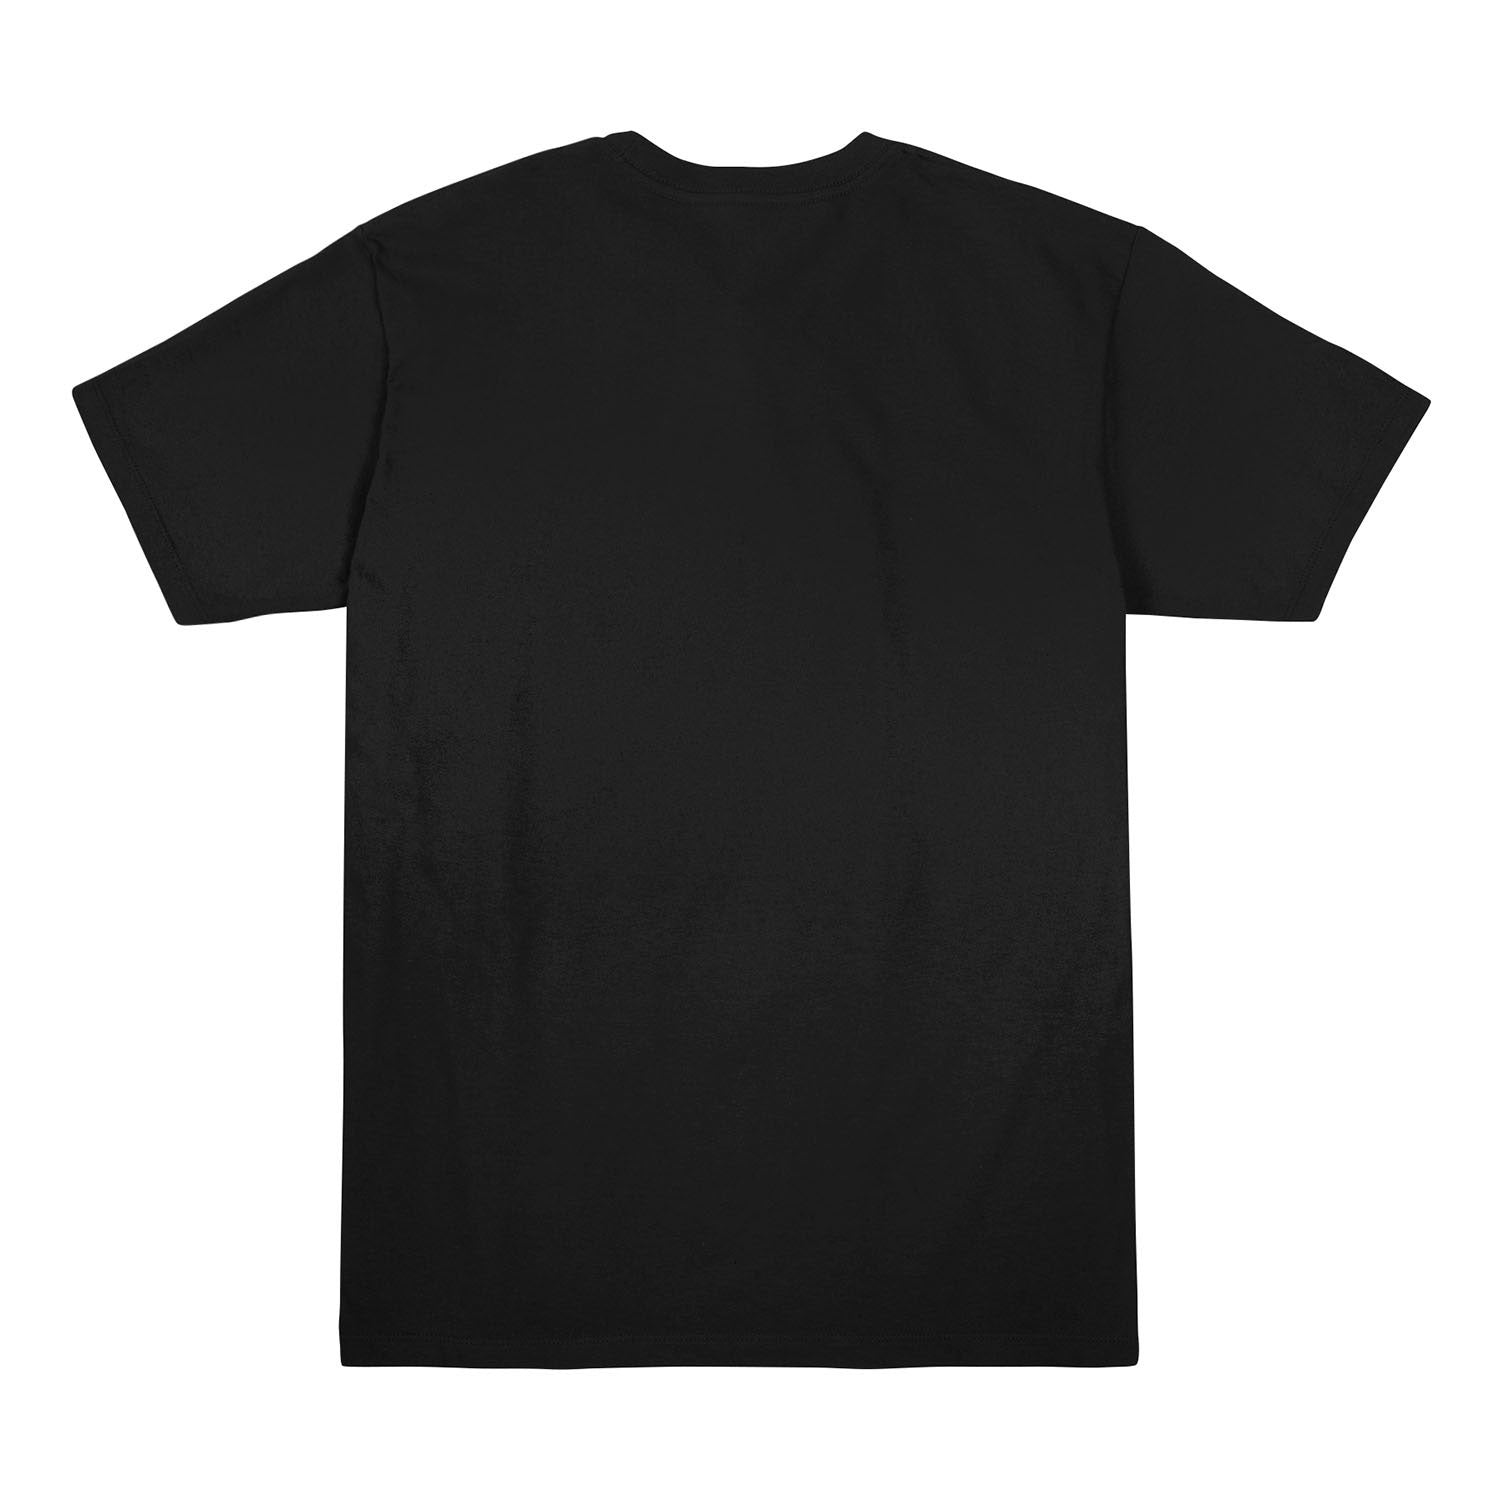 Call of Duty: Warzone 2.0 Black T-Shirt - Back View